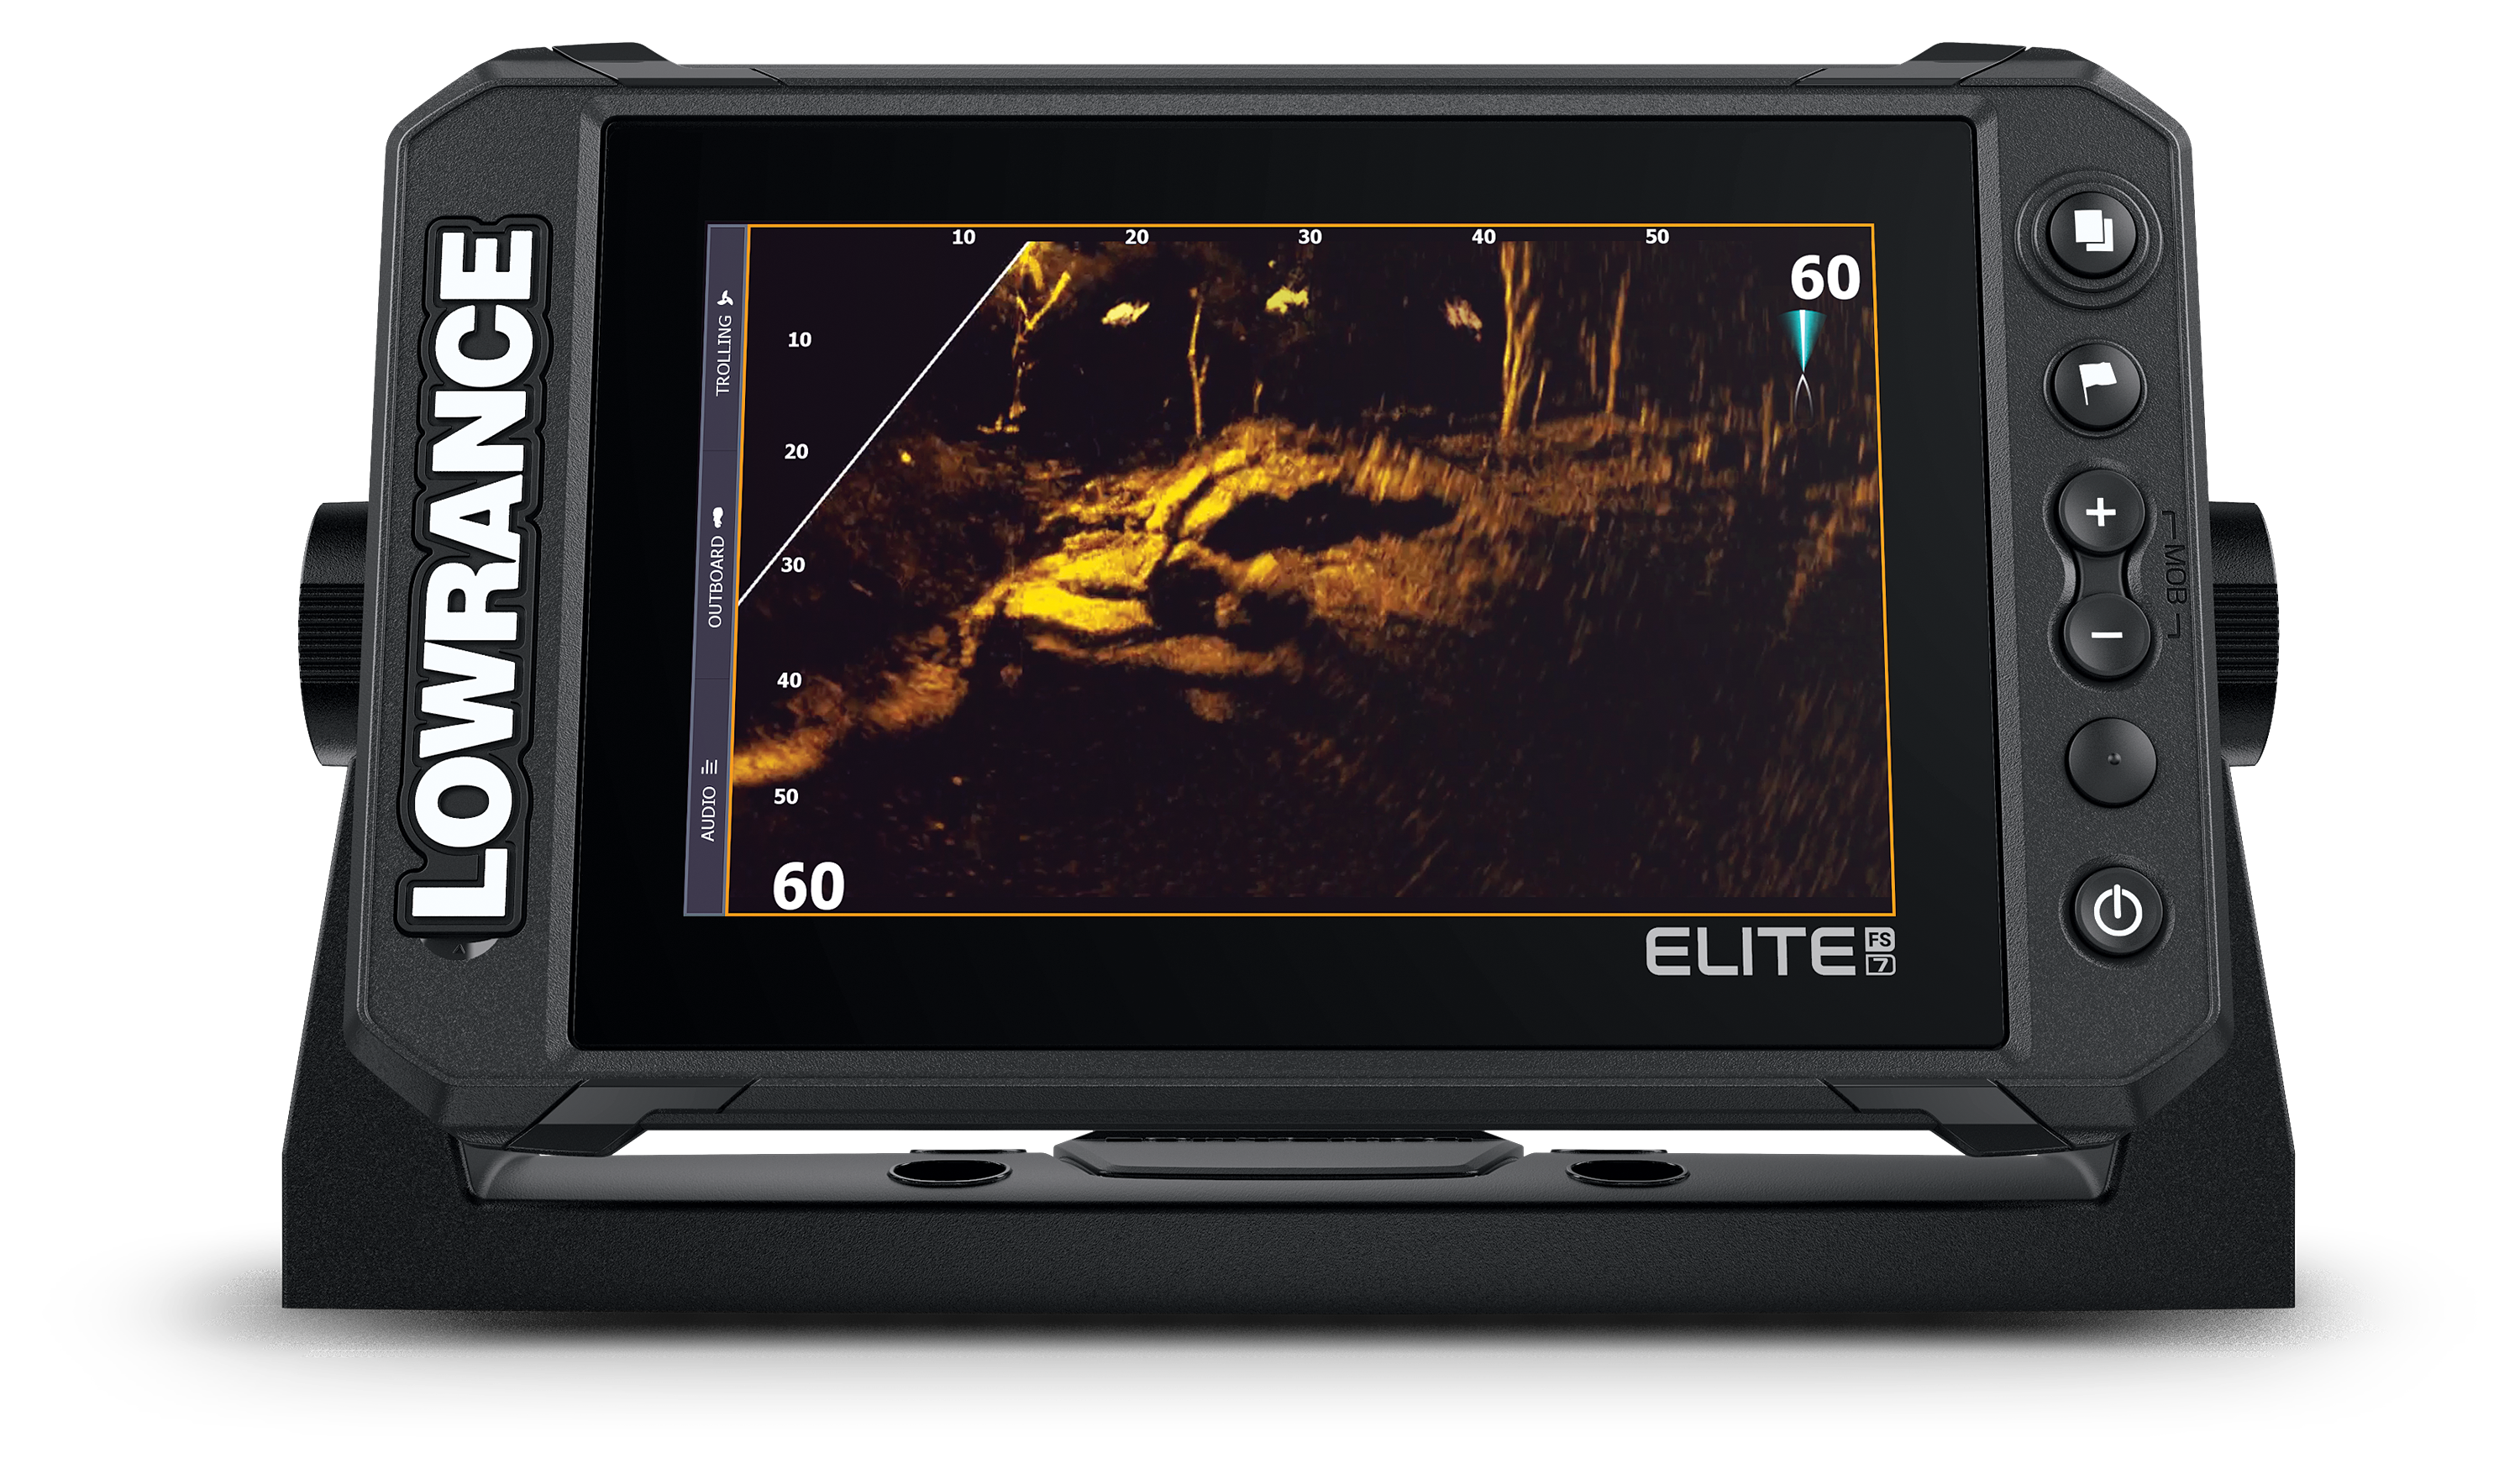 Lowrance HOOK Reveal 5 Fish Finder